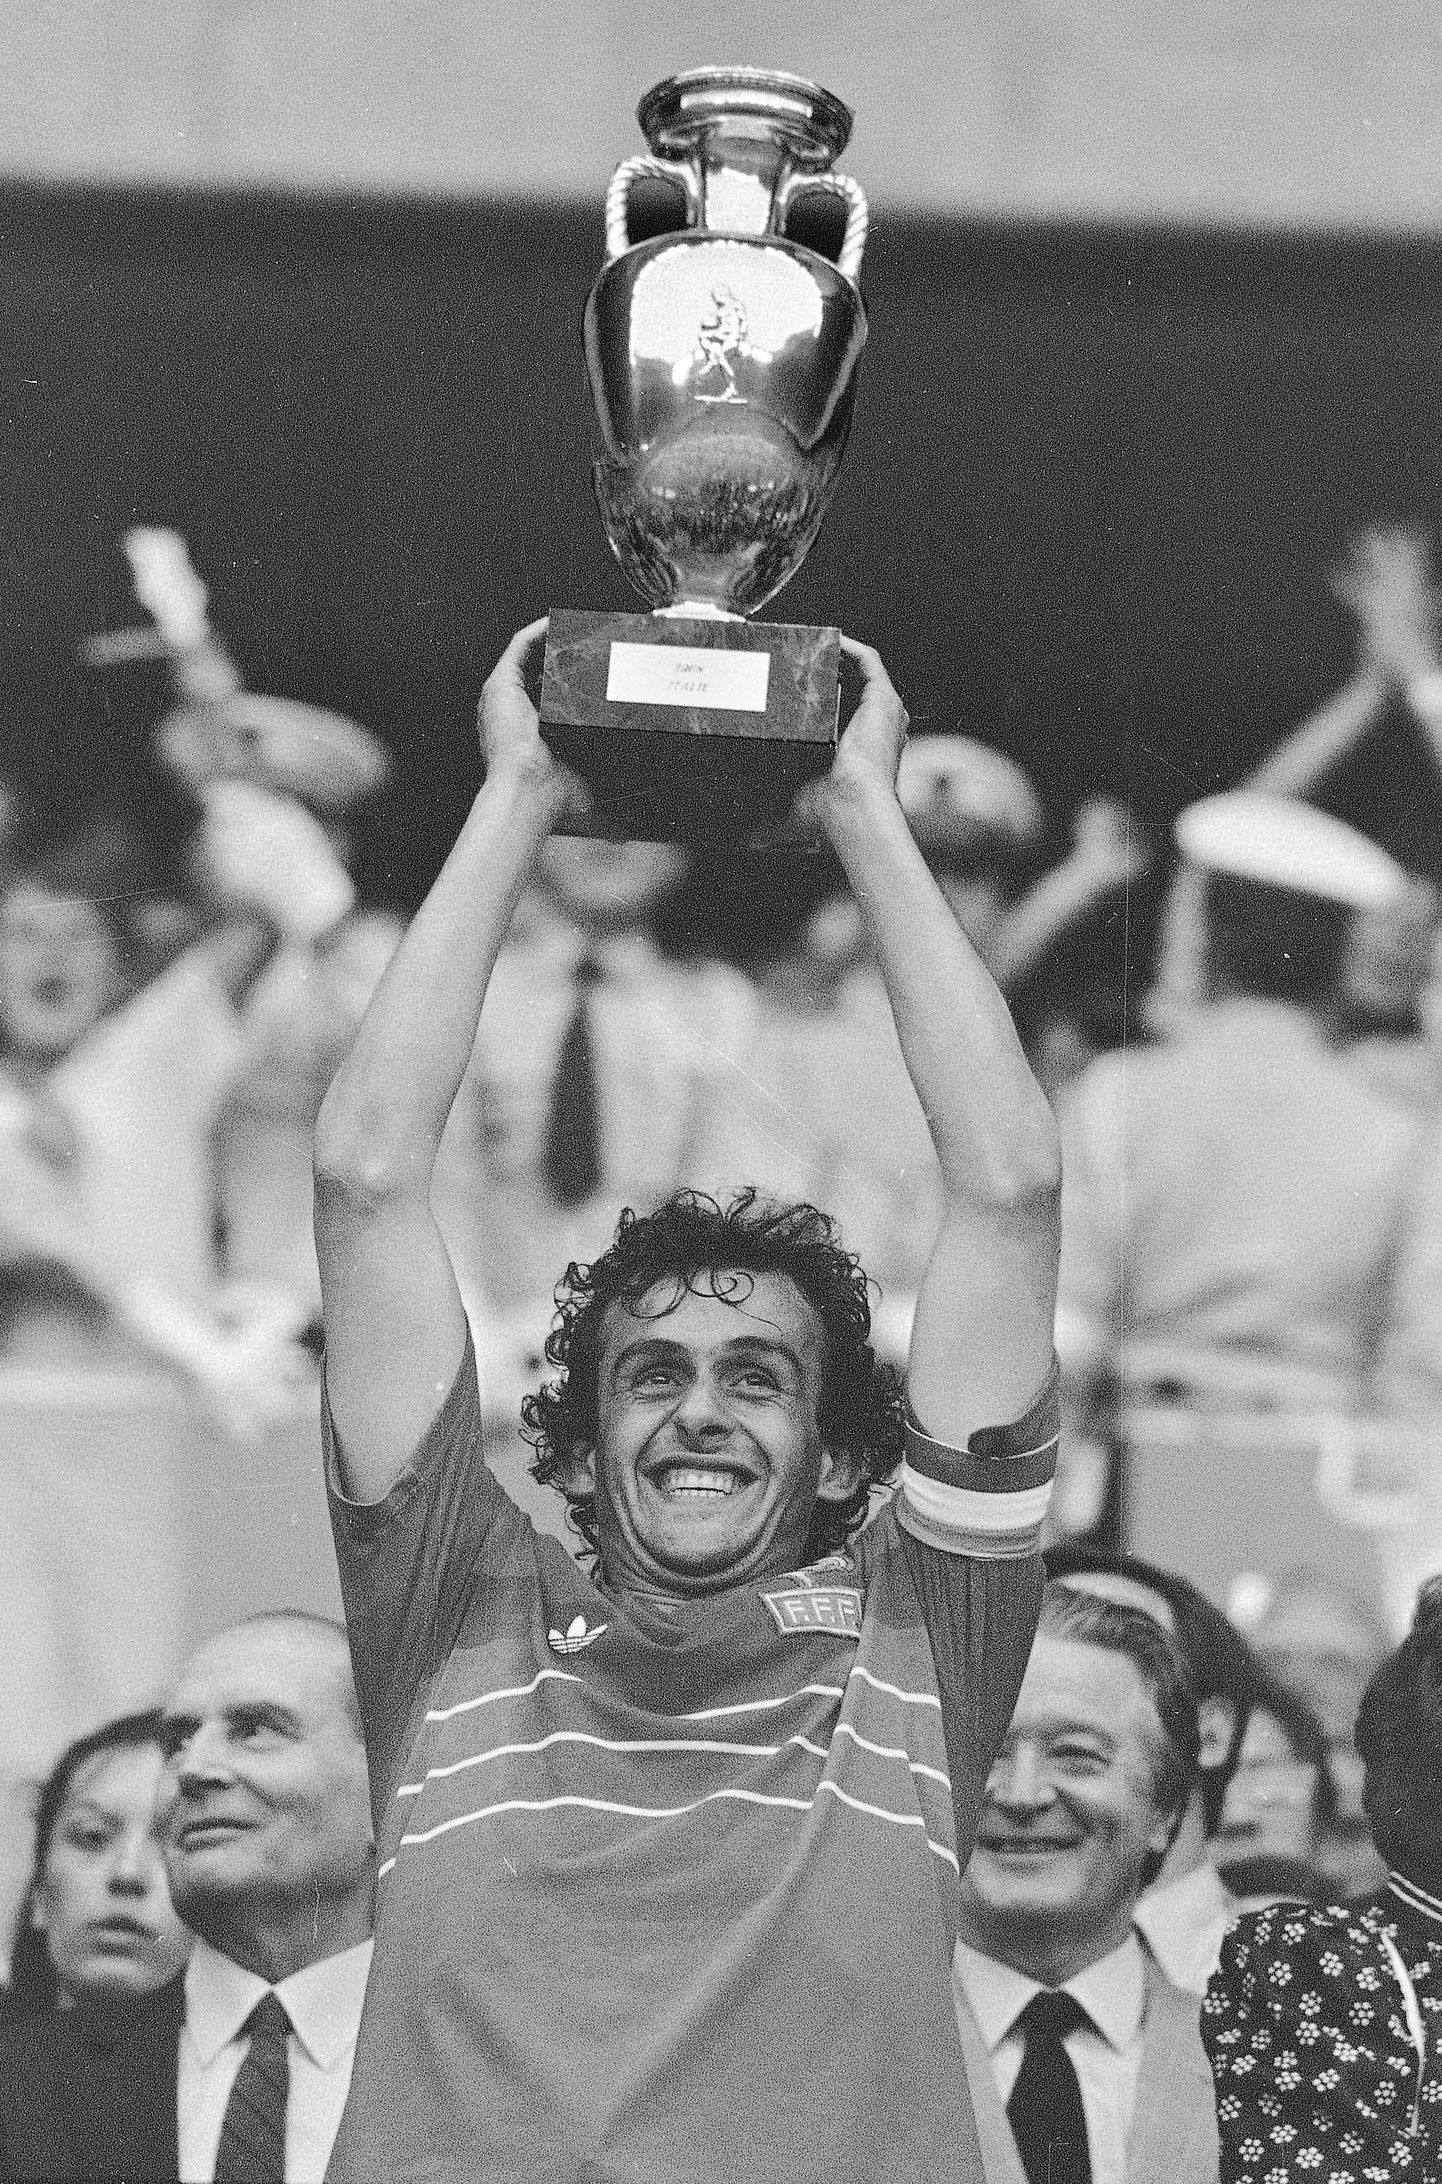 ** FILE ** In this June 27, 1984 file photo French team captain Michel Platini holds high the winners trophy after France defeated Spain, 2-0, in the final match of the European Soccer Championship at the Parc des Princes stadium in Paris.  French President Francois Mitterand is at bottom left.  (AP Photo/File) / SCANPIX Code: 436